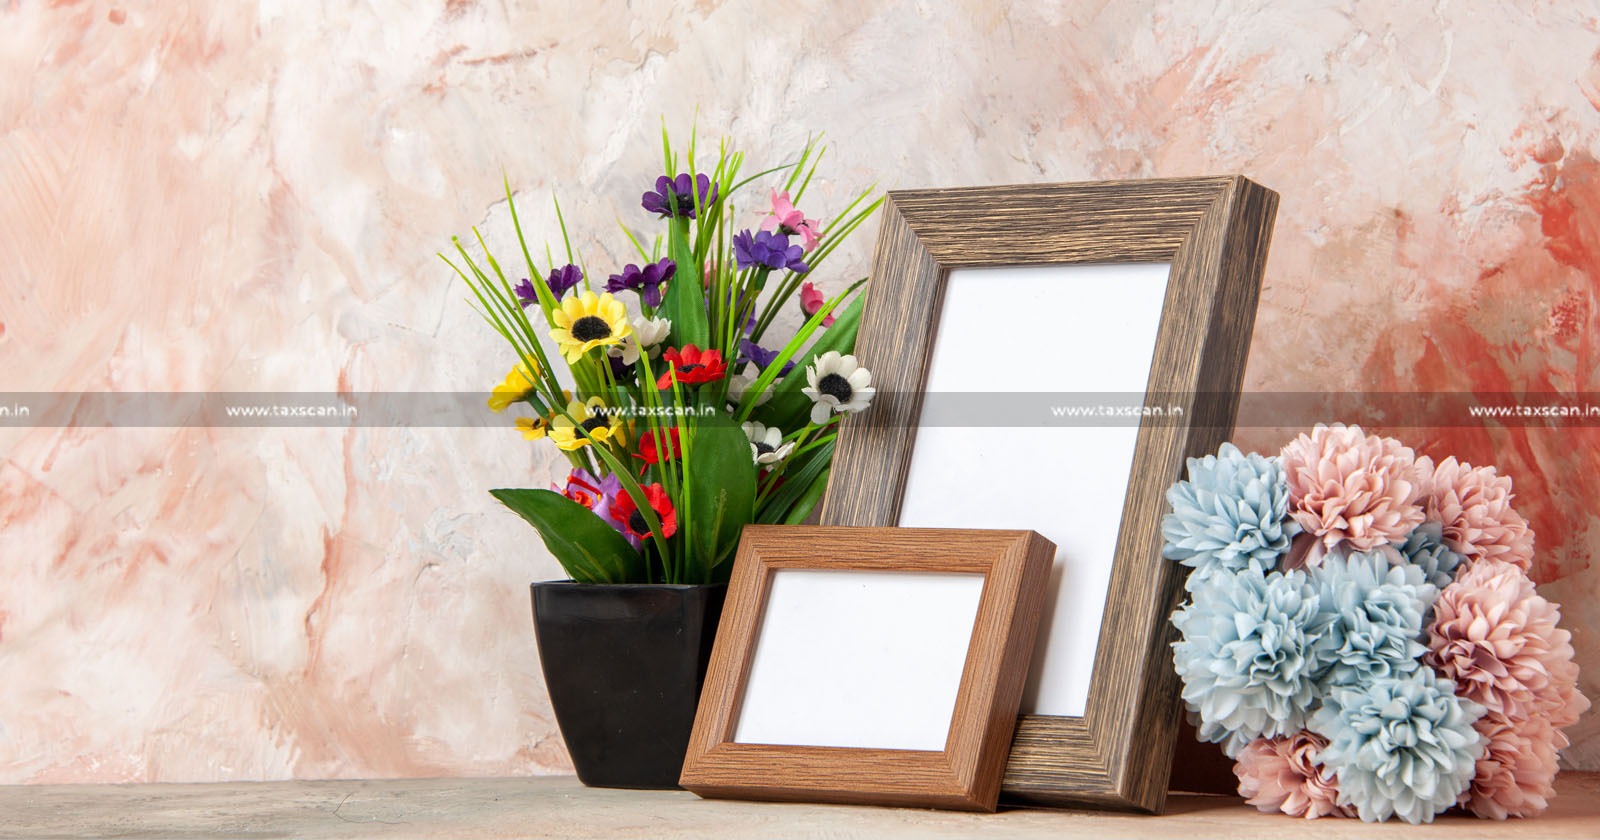 CESTAT - Penalty - Customs Act on Undervaluation of Import of Artificial flowers and Photo frames on ground of Absence of Corroborative Evidence - TAXSCAN